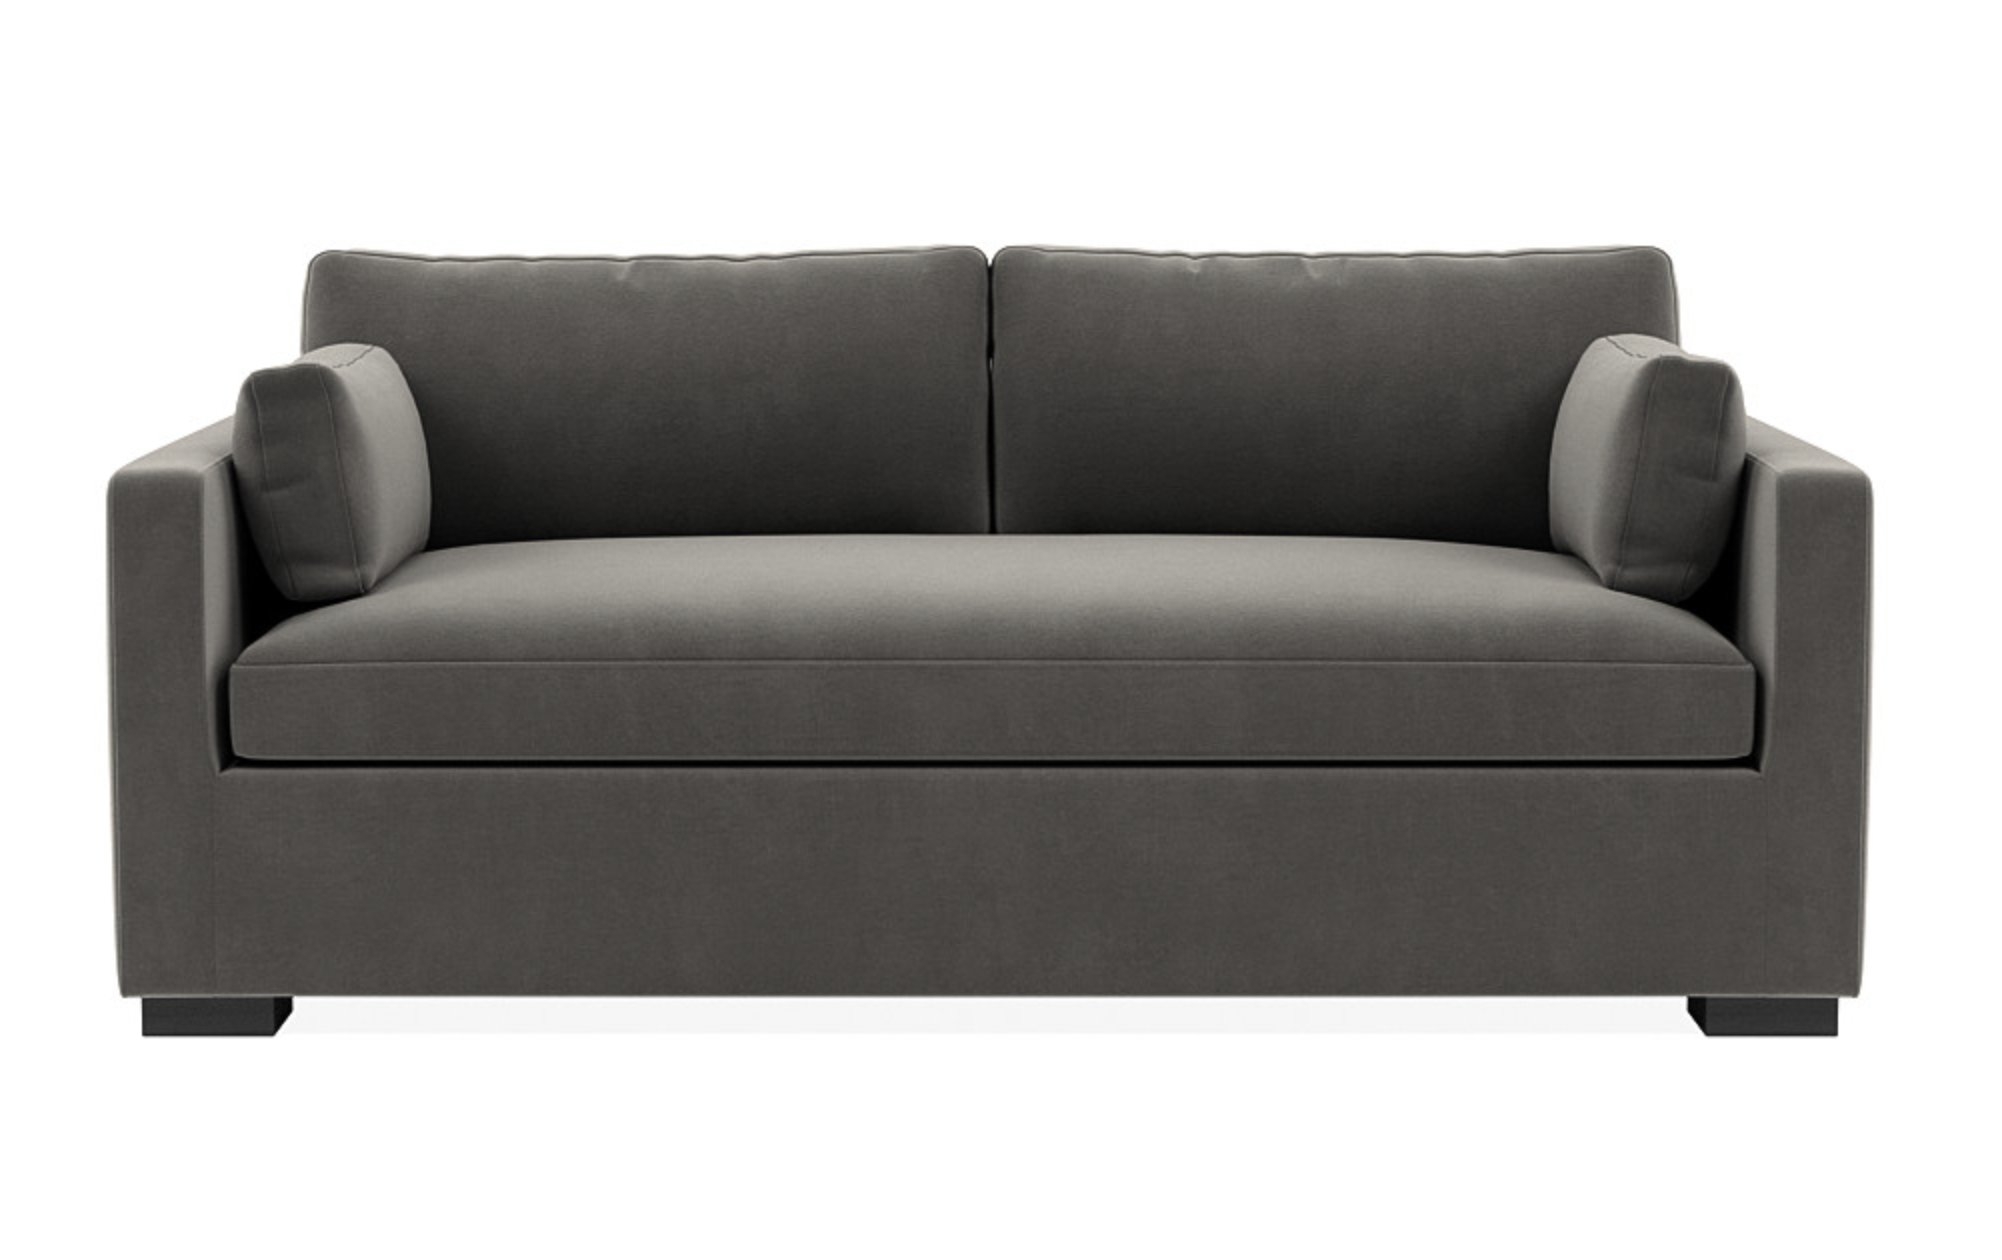 Charly Sofa in Galaxy Velvet with Painted Black block legs - Image 0